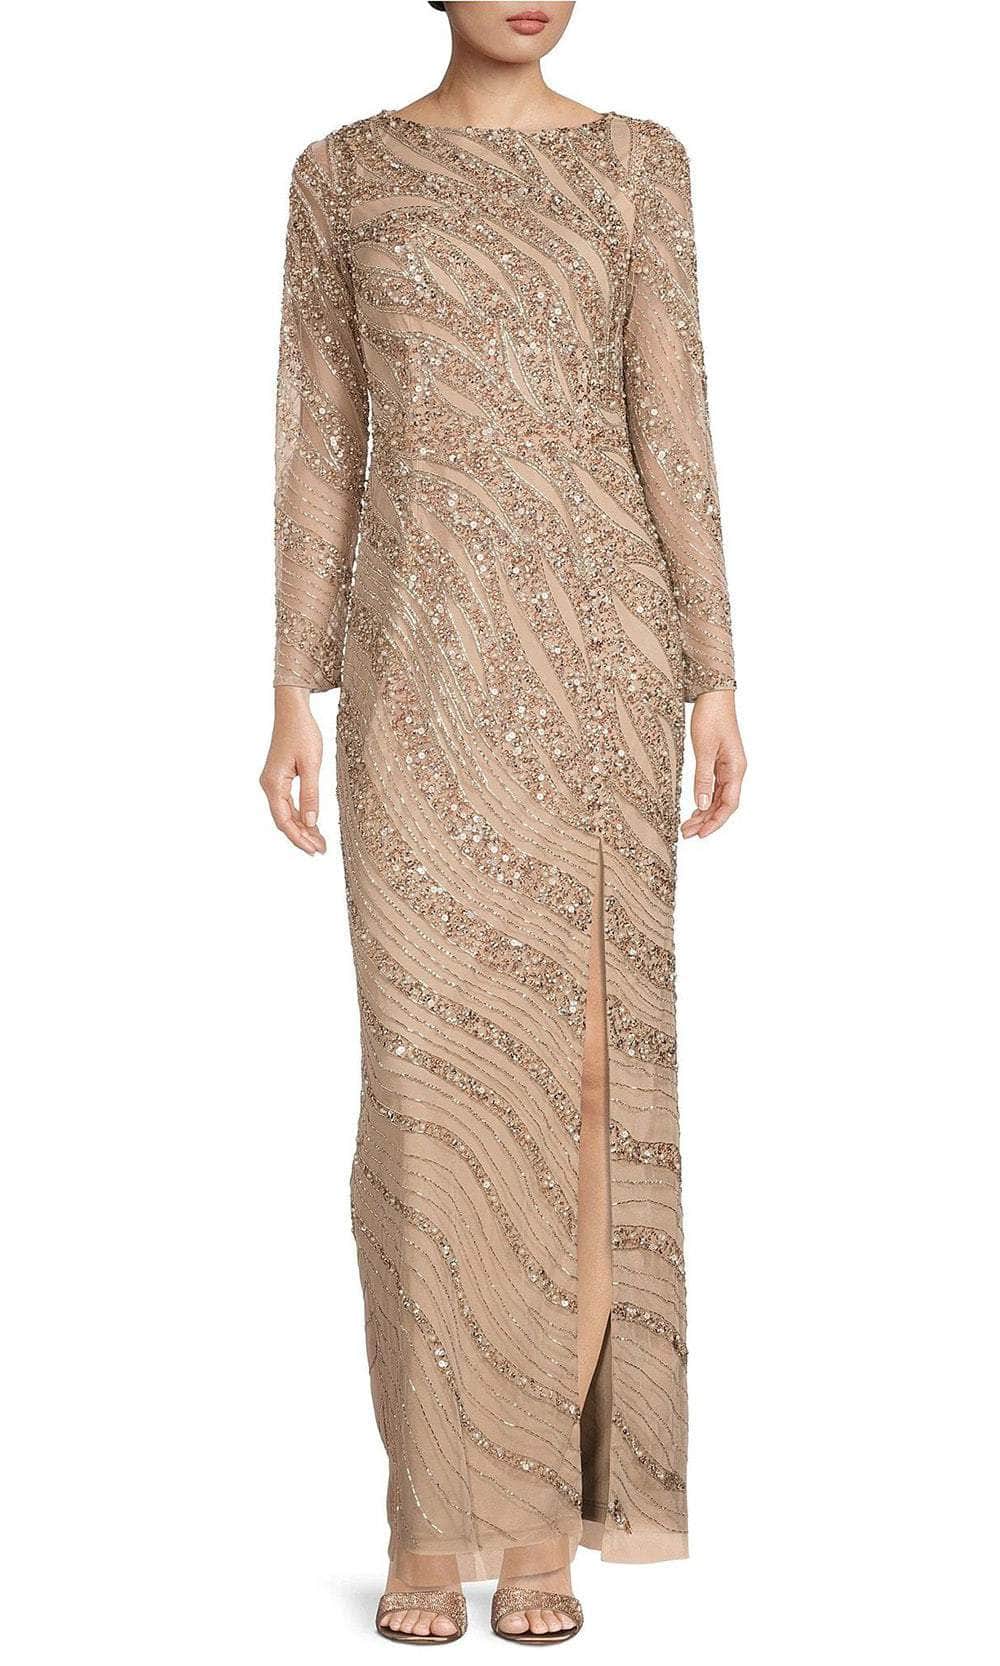 Image of Aidan Mattox MD1E207721 - Embellished Illusion Slit Gown